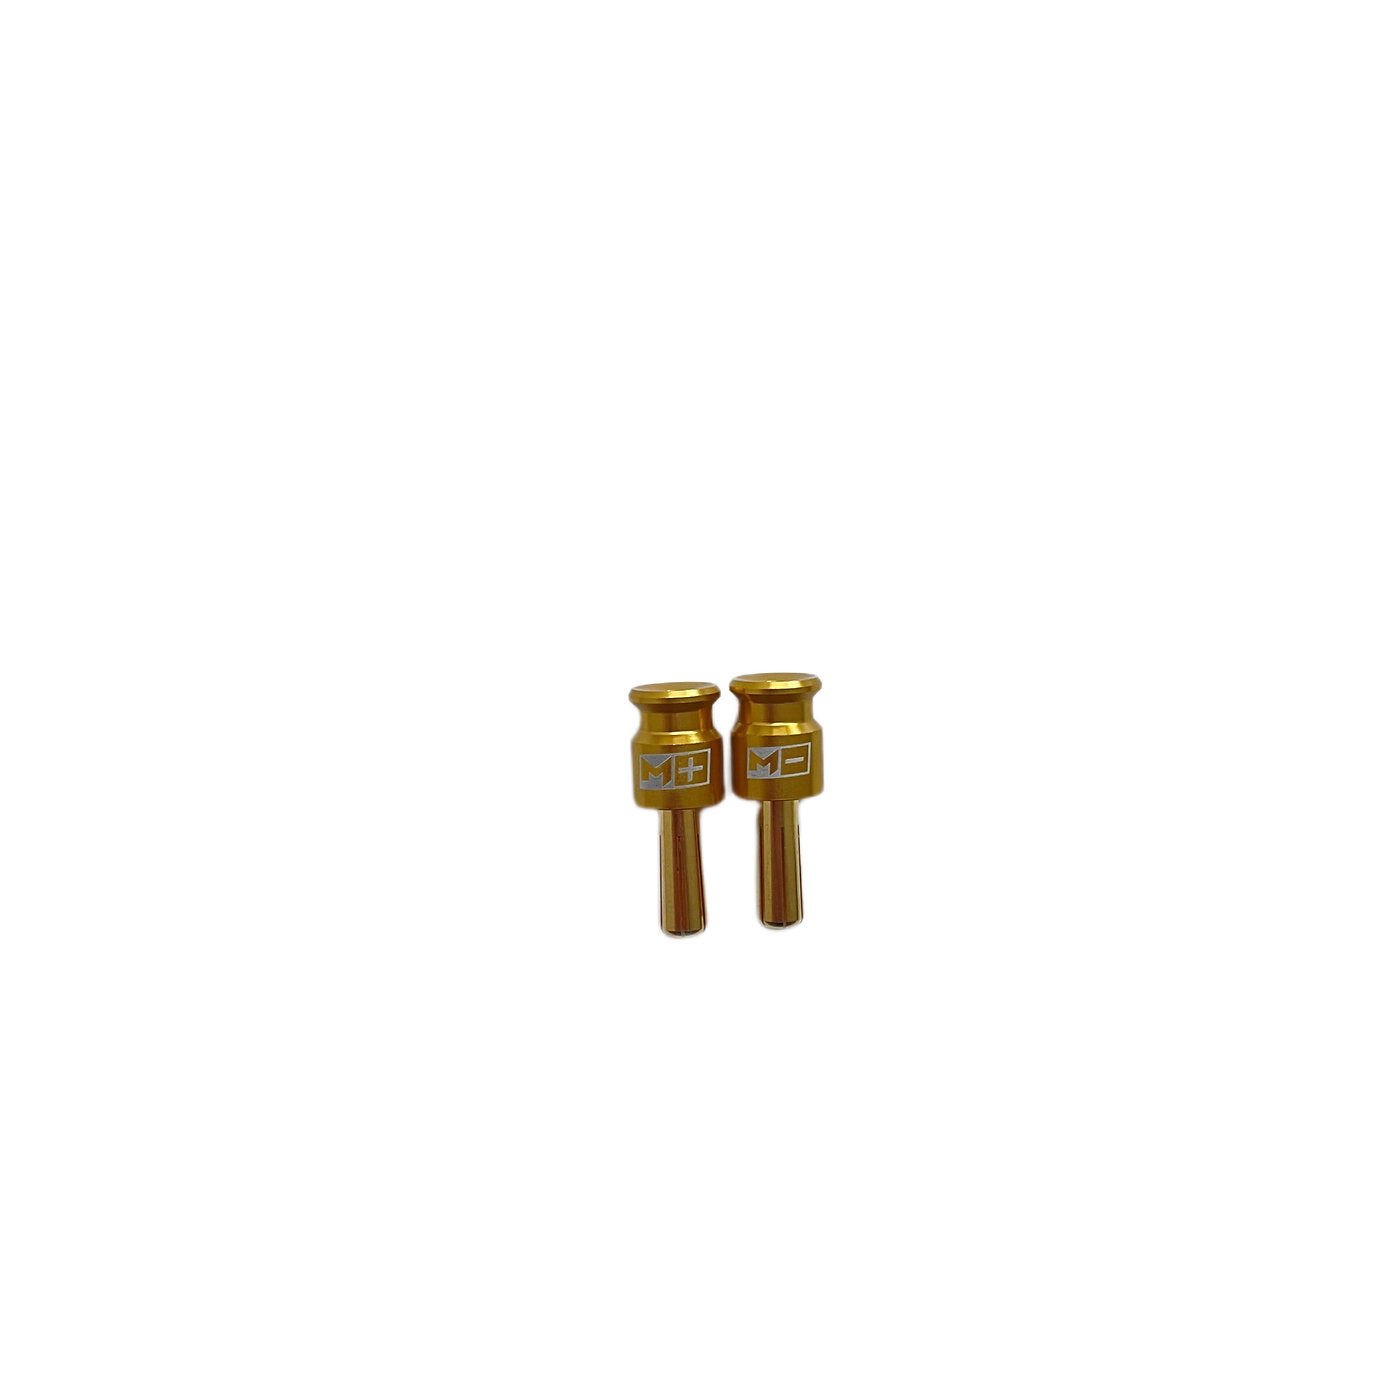 Mach-1 Racing Gold Grips with 5mm gold plated bullets - [Sunshine-Coast] - Mach-1 - [RC-Car] - [Scale-Model]